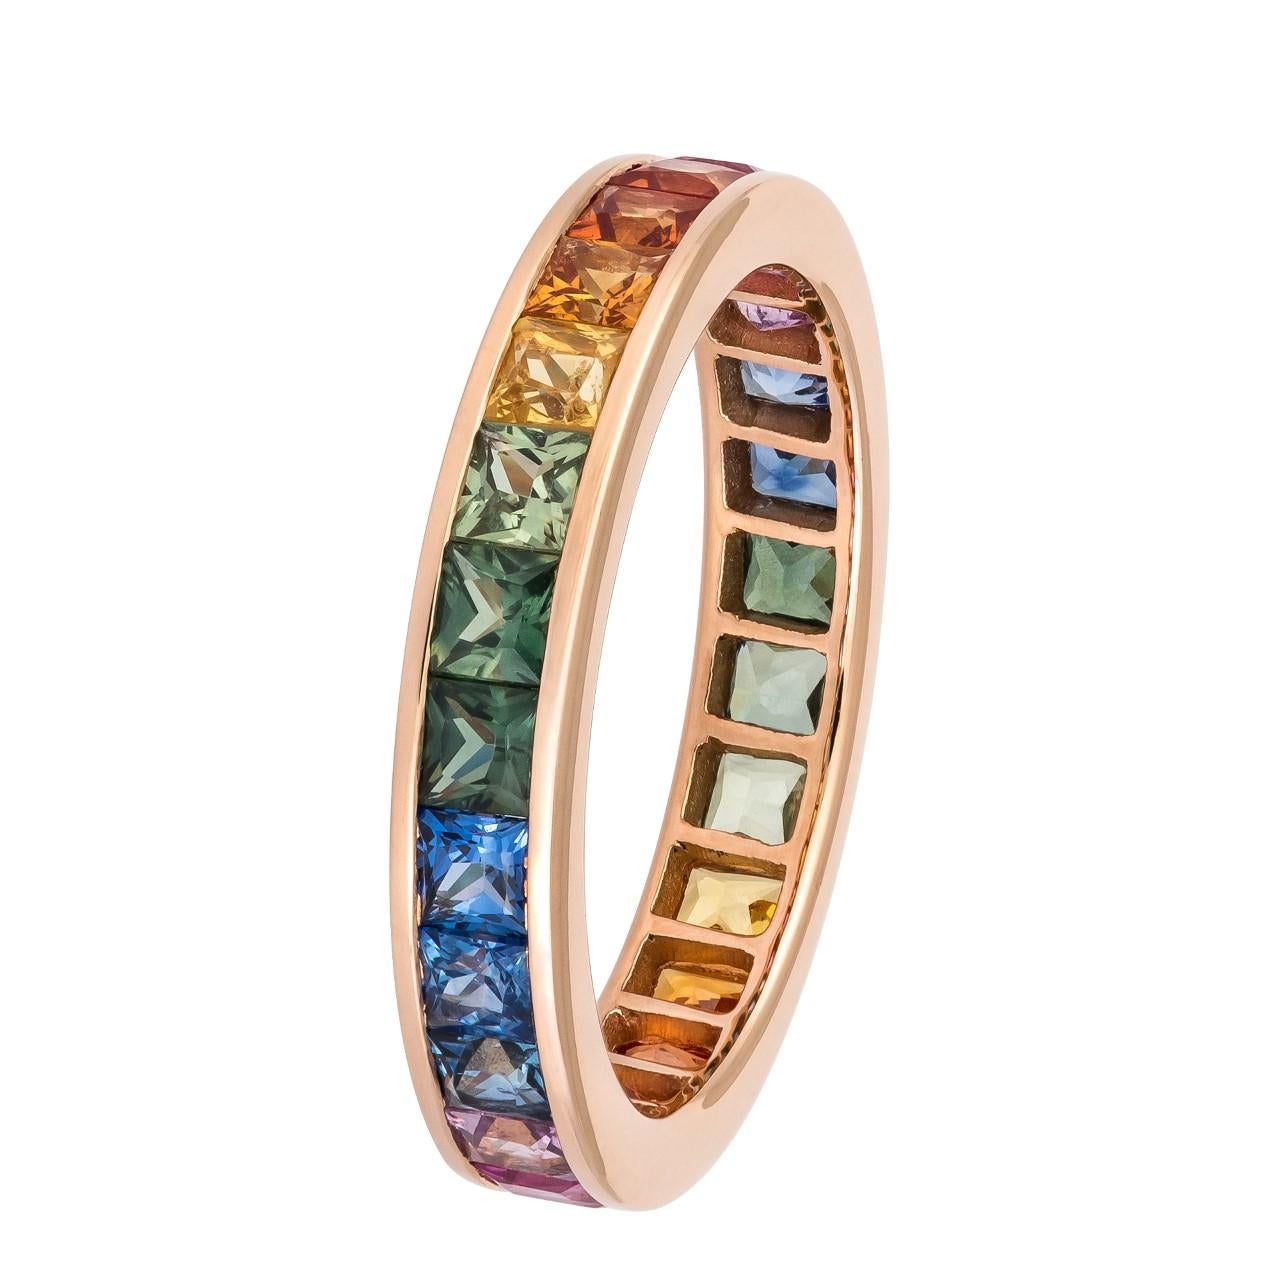 Antique Cushion Cut Fashion Multi Sapphire 18k Diamond Colourful Rose Gold Band Ring for Her For Sale